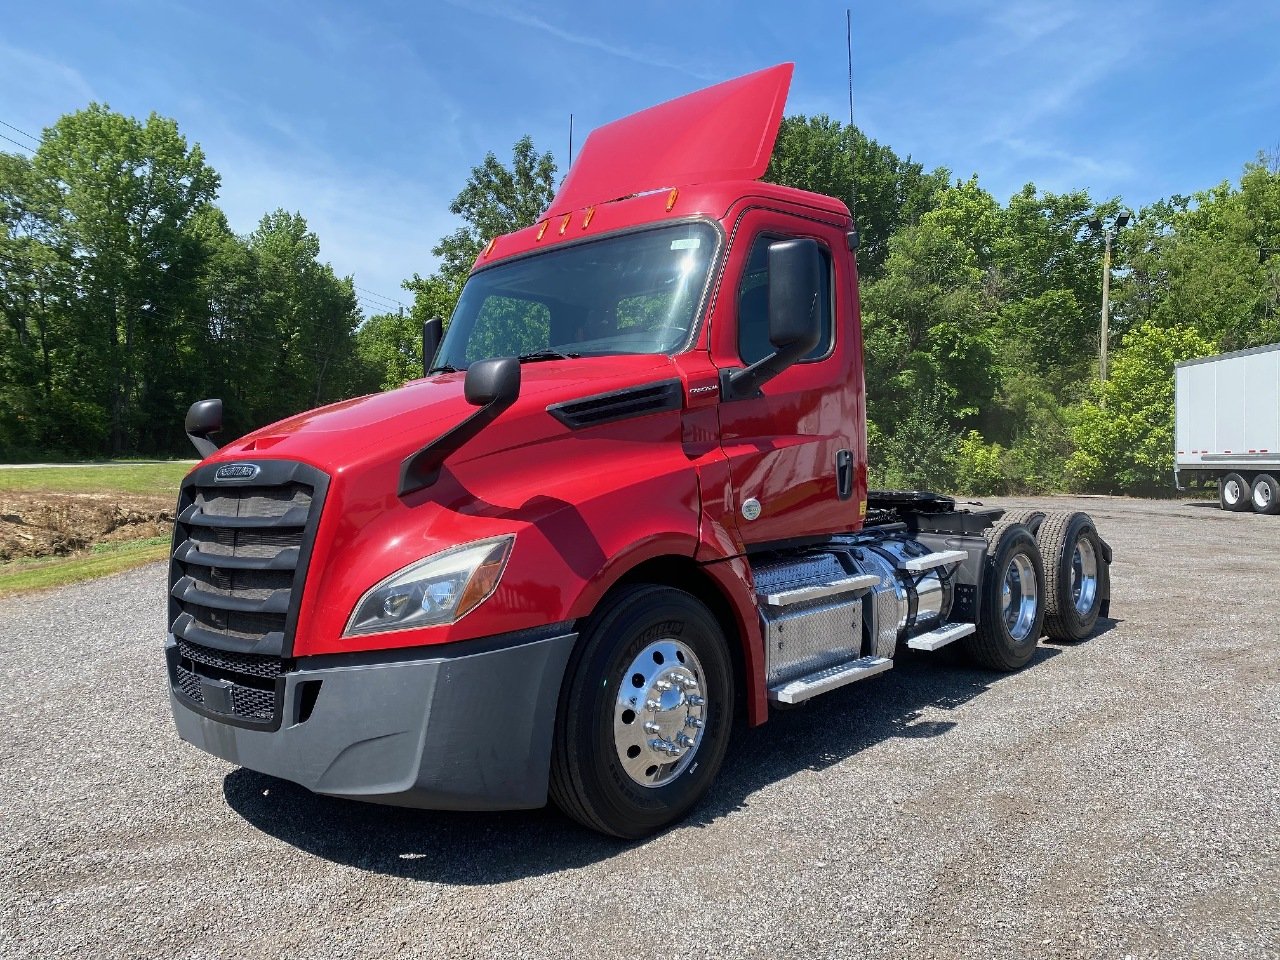 USED 2018 FREIGHTLINER CASCADIA TANDEM AXLE DAYCAB TRUCK #15257